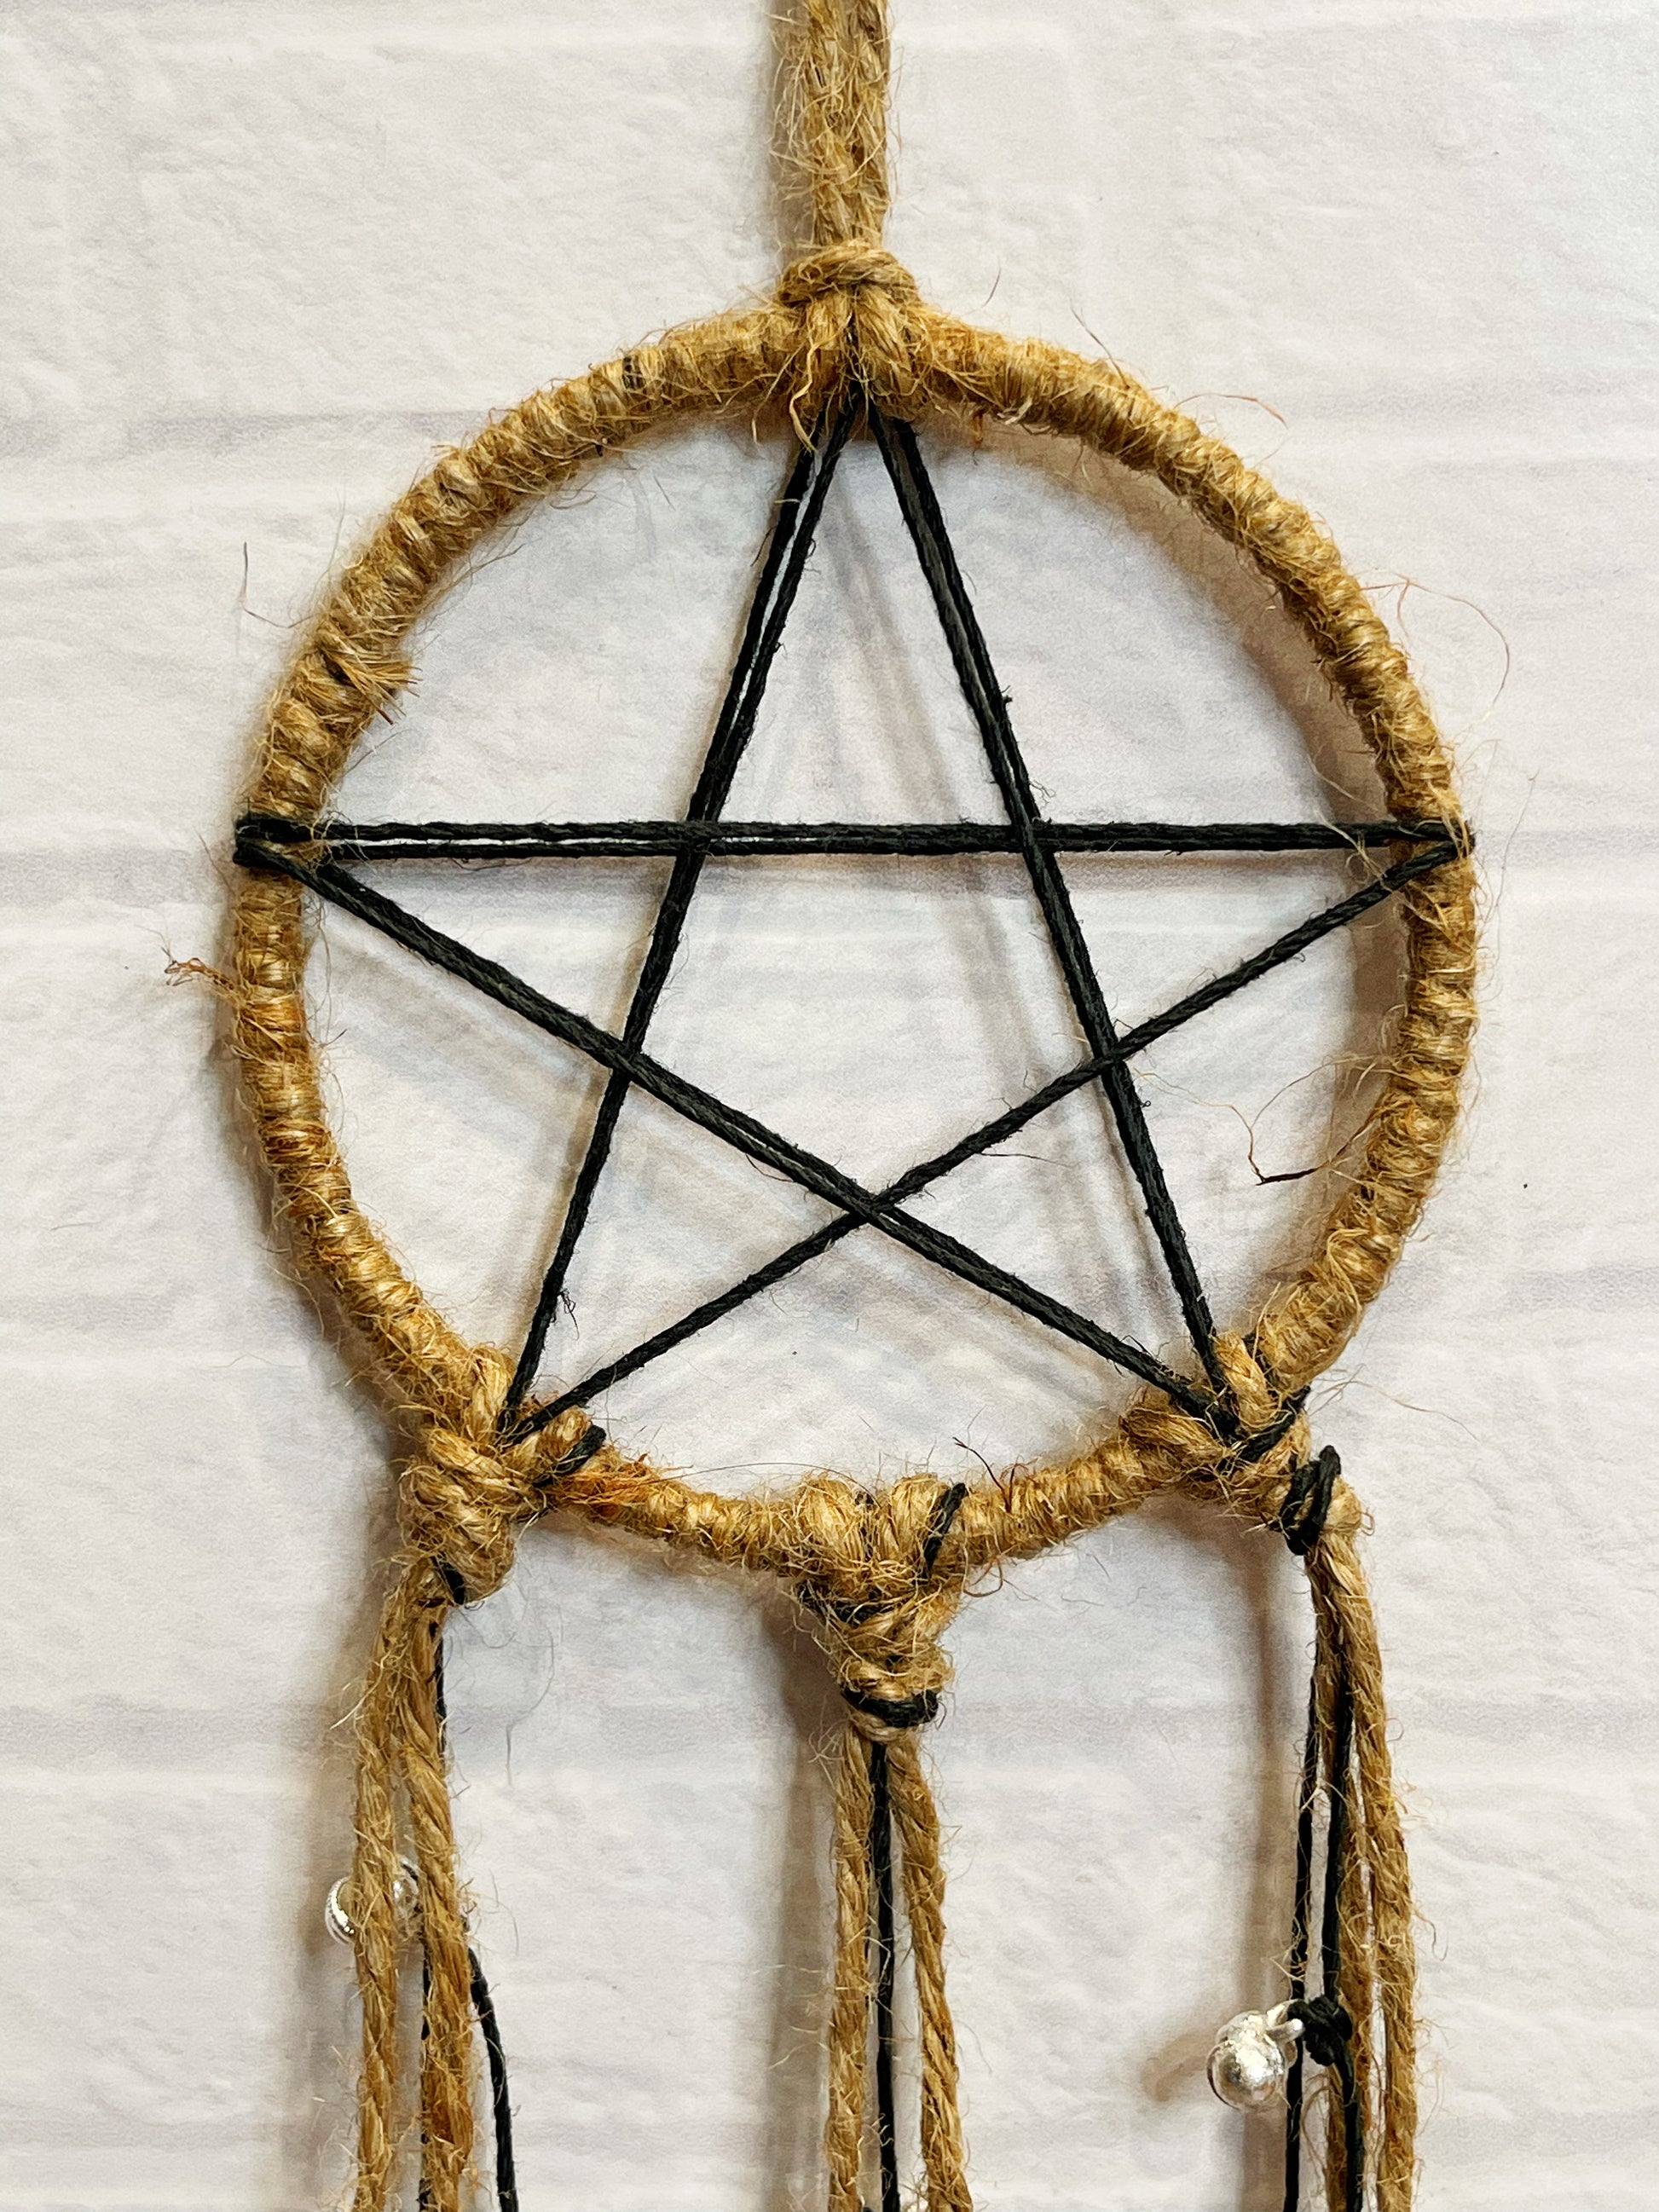 Pentagram Witches Bells – The Eclectic Witches Loft